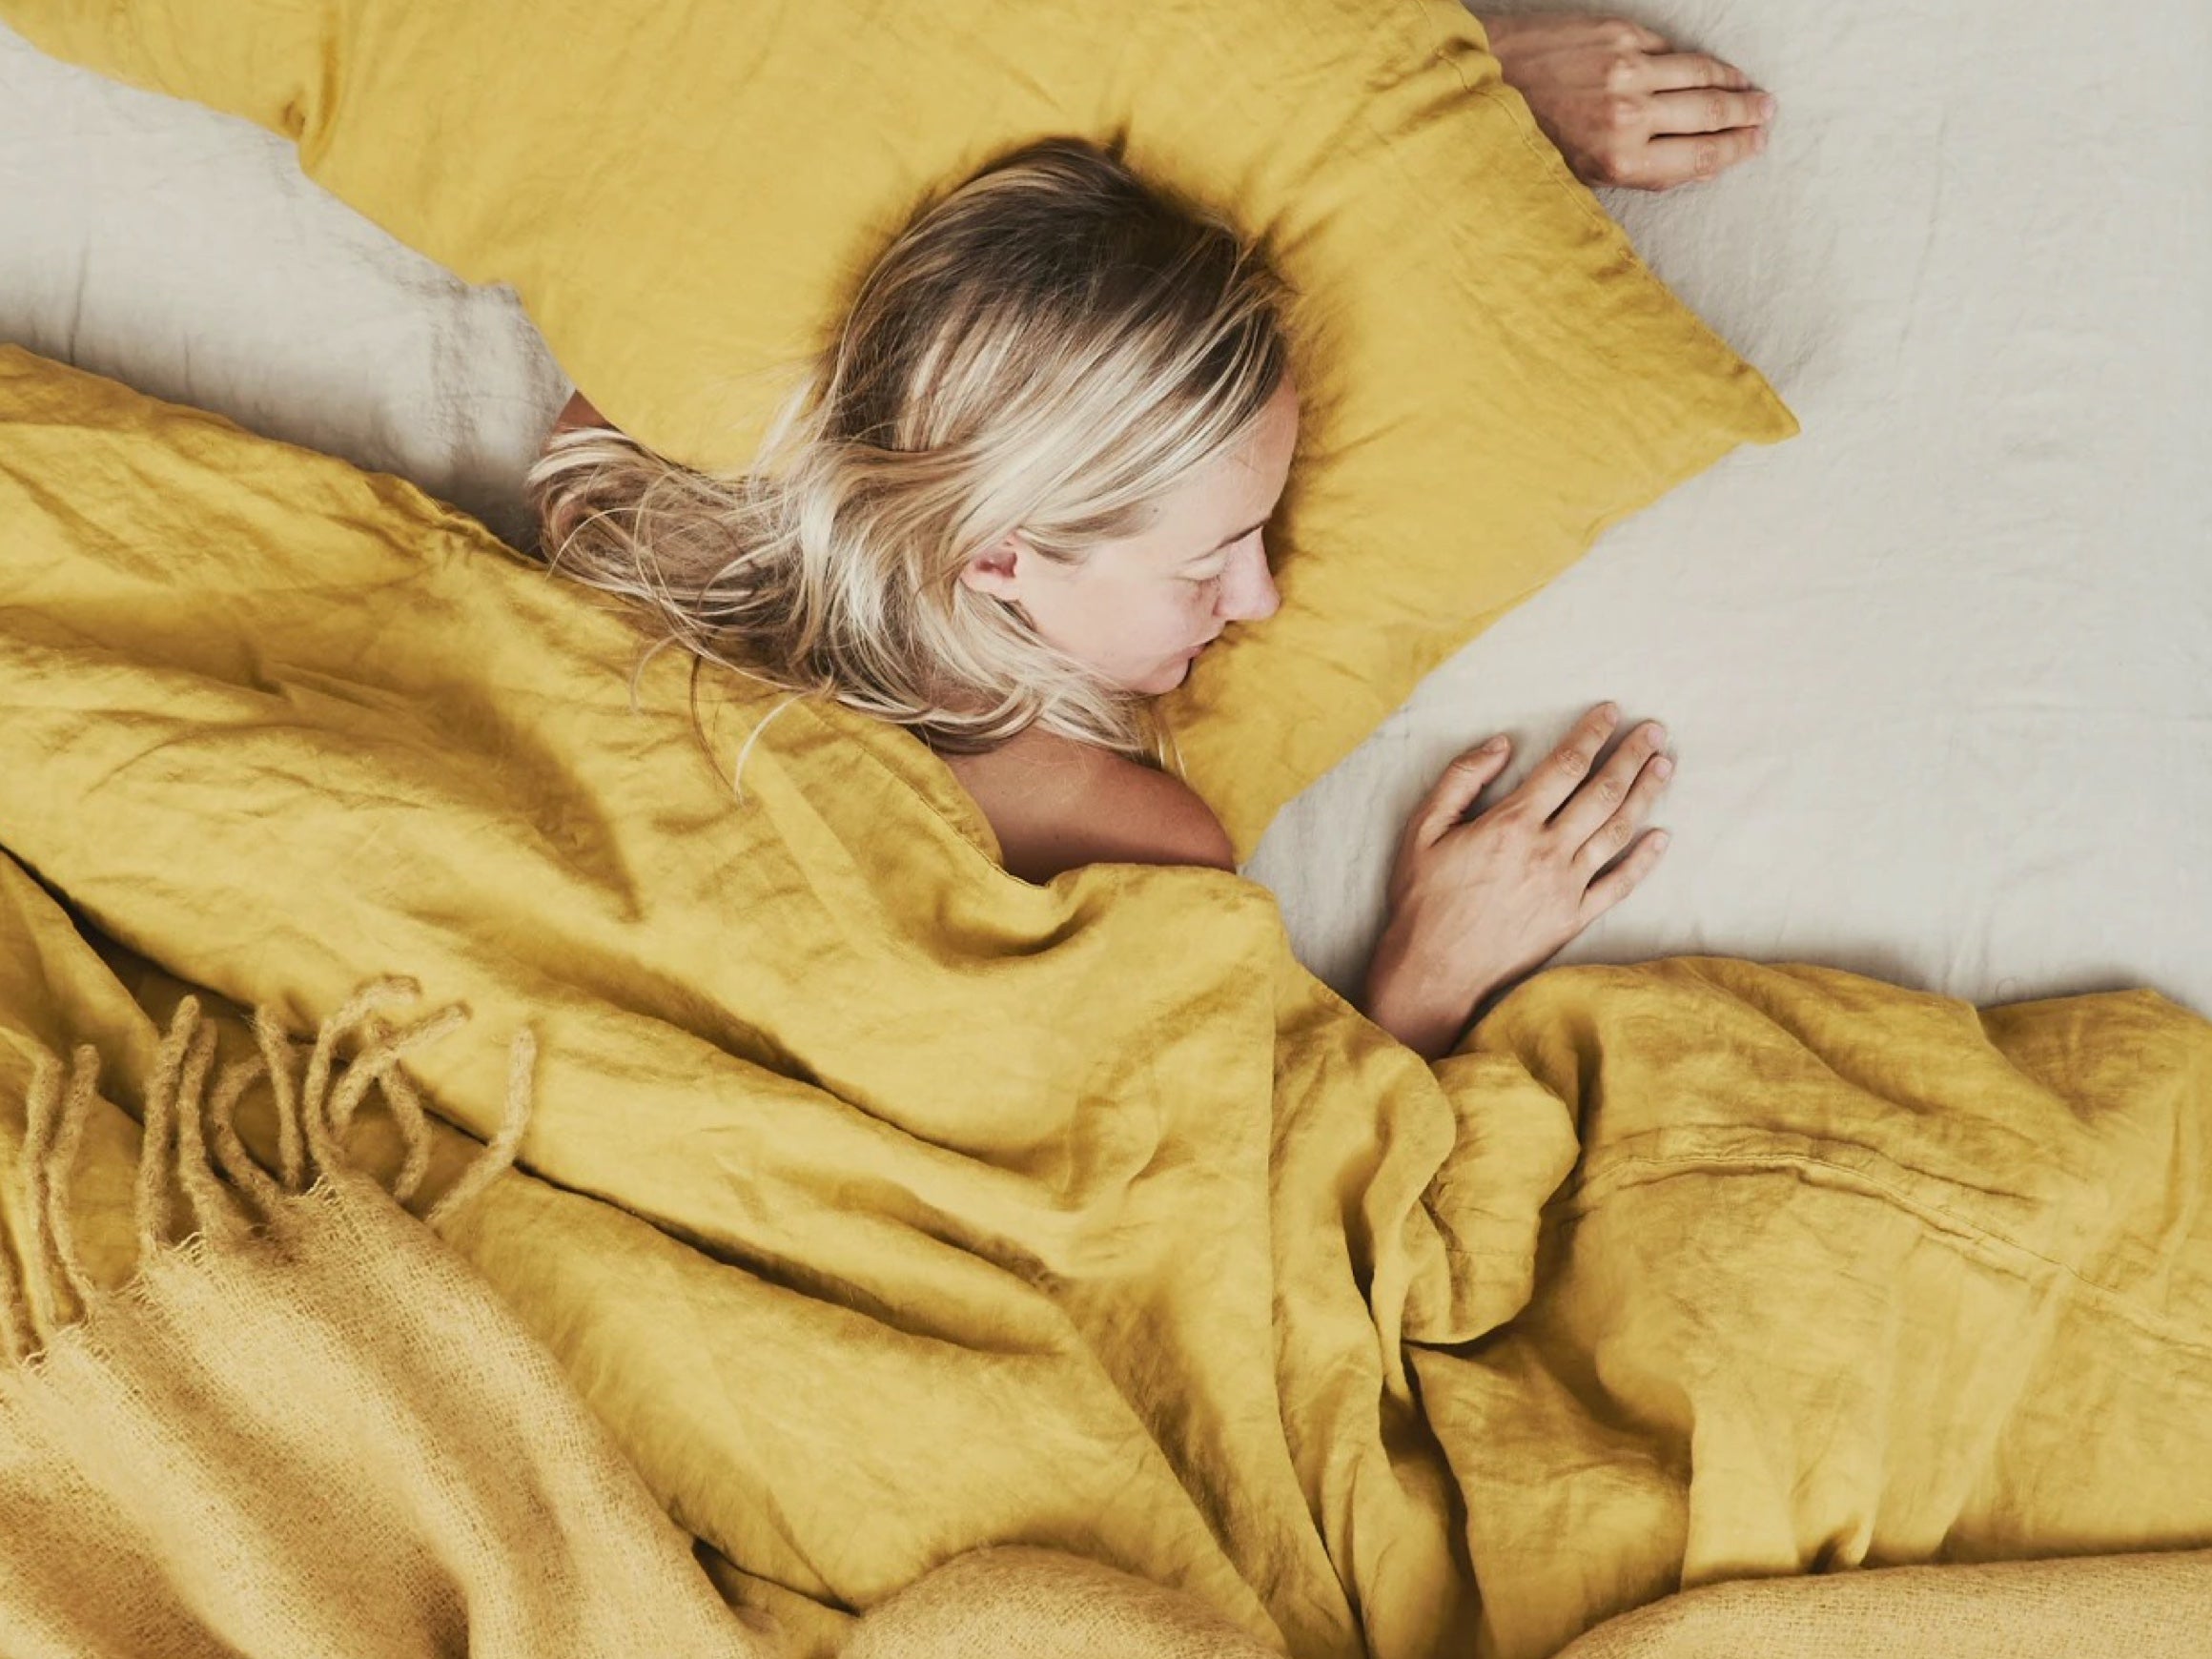 A woman sleeps on mustard and flax linens by Hawkins New York.